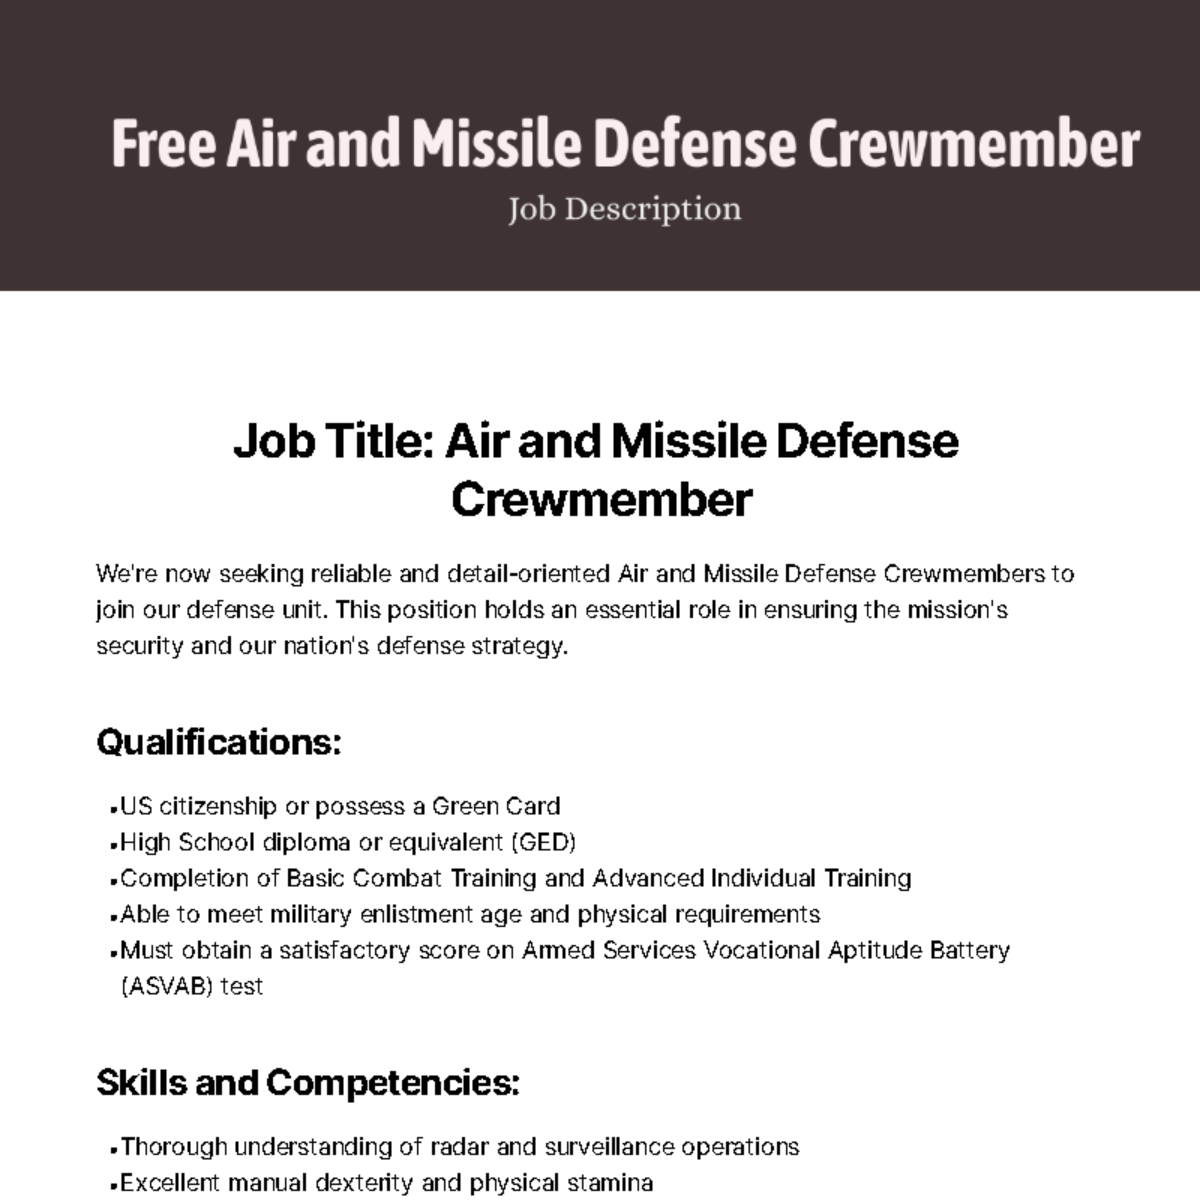 Free Air and Missile Defense Crewmember Job Description Template